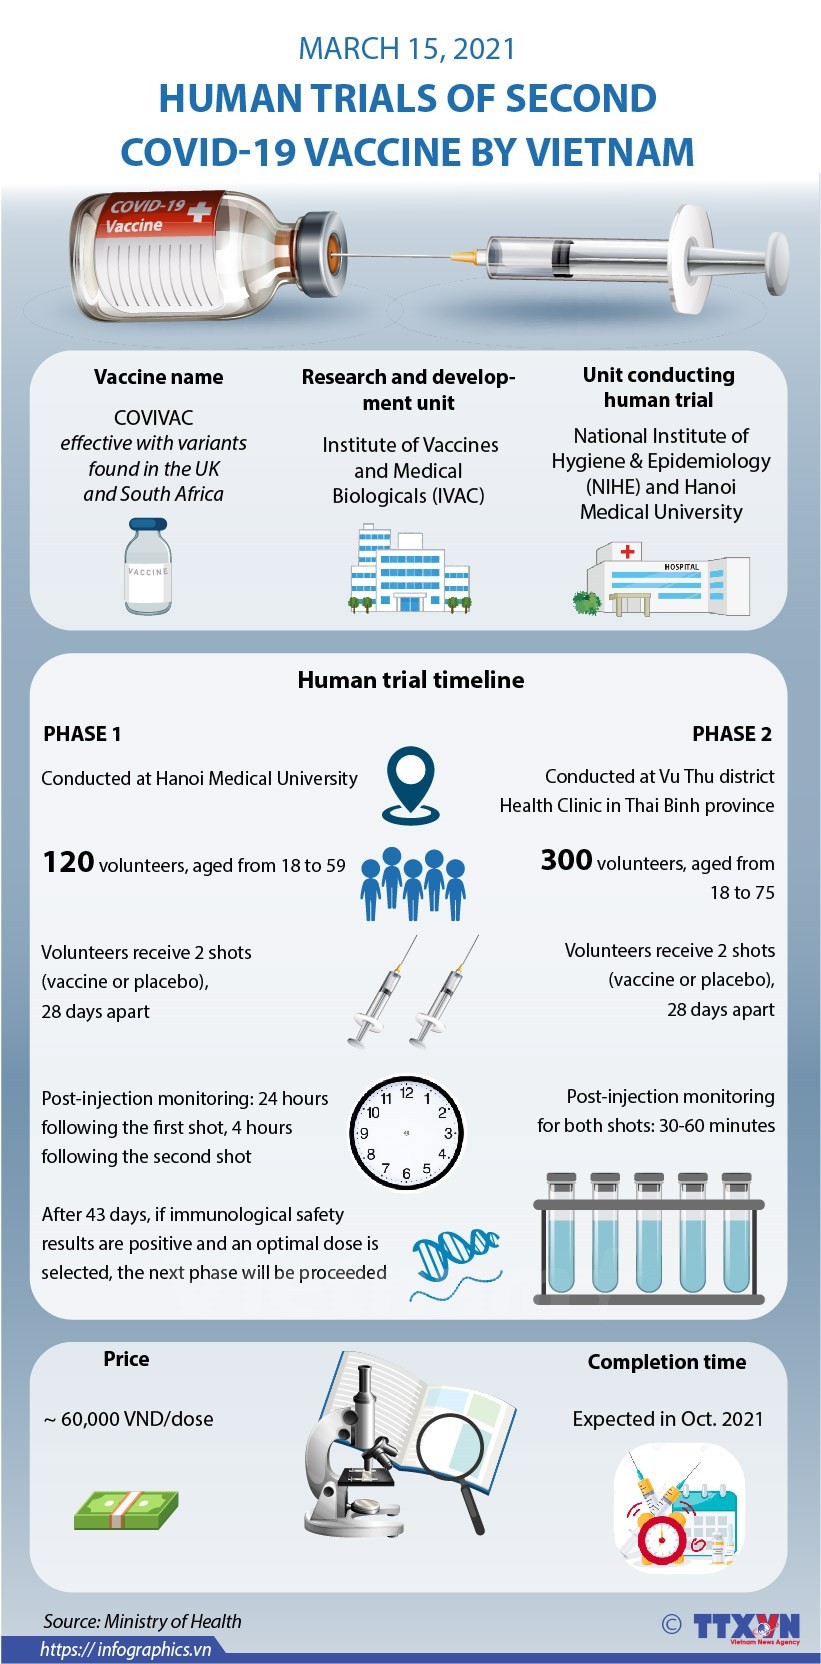 Human trials of second COVID-19 vaccine by Viet Nam